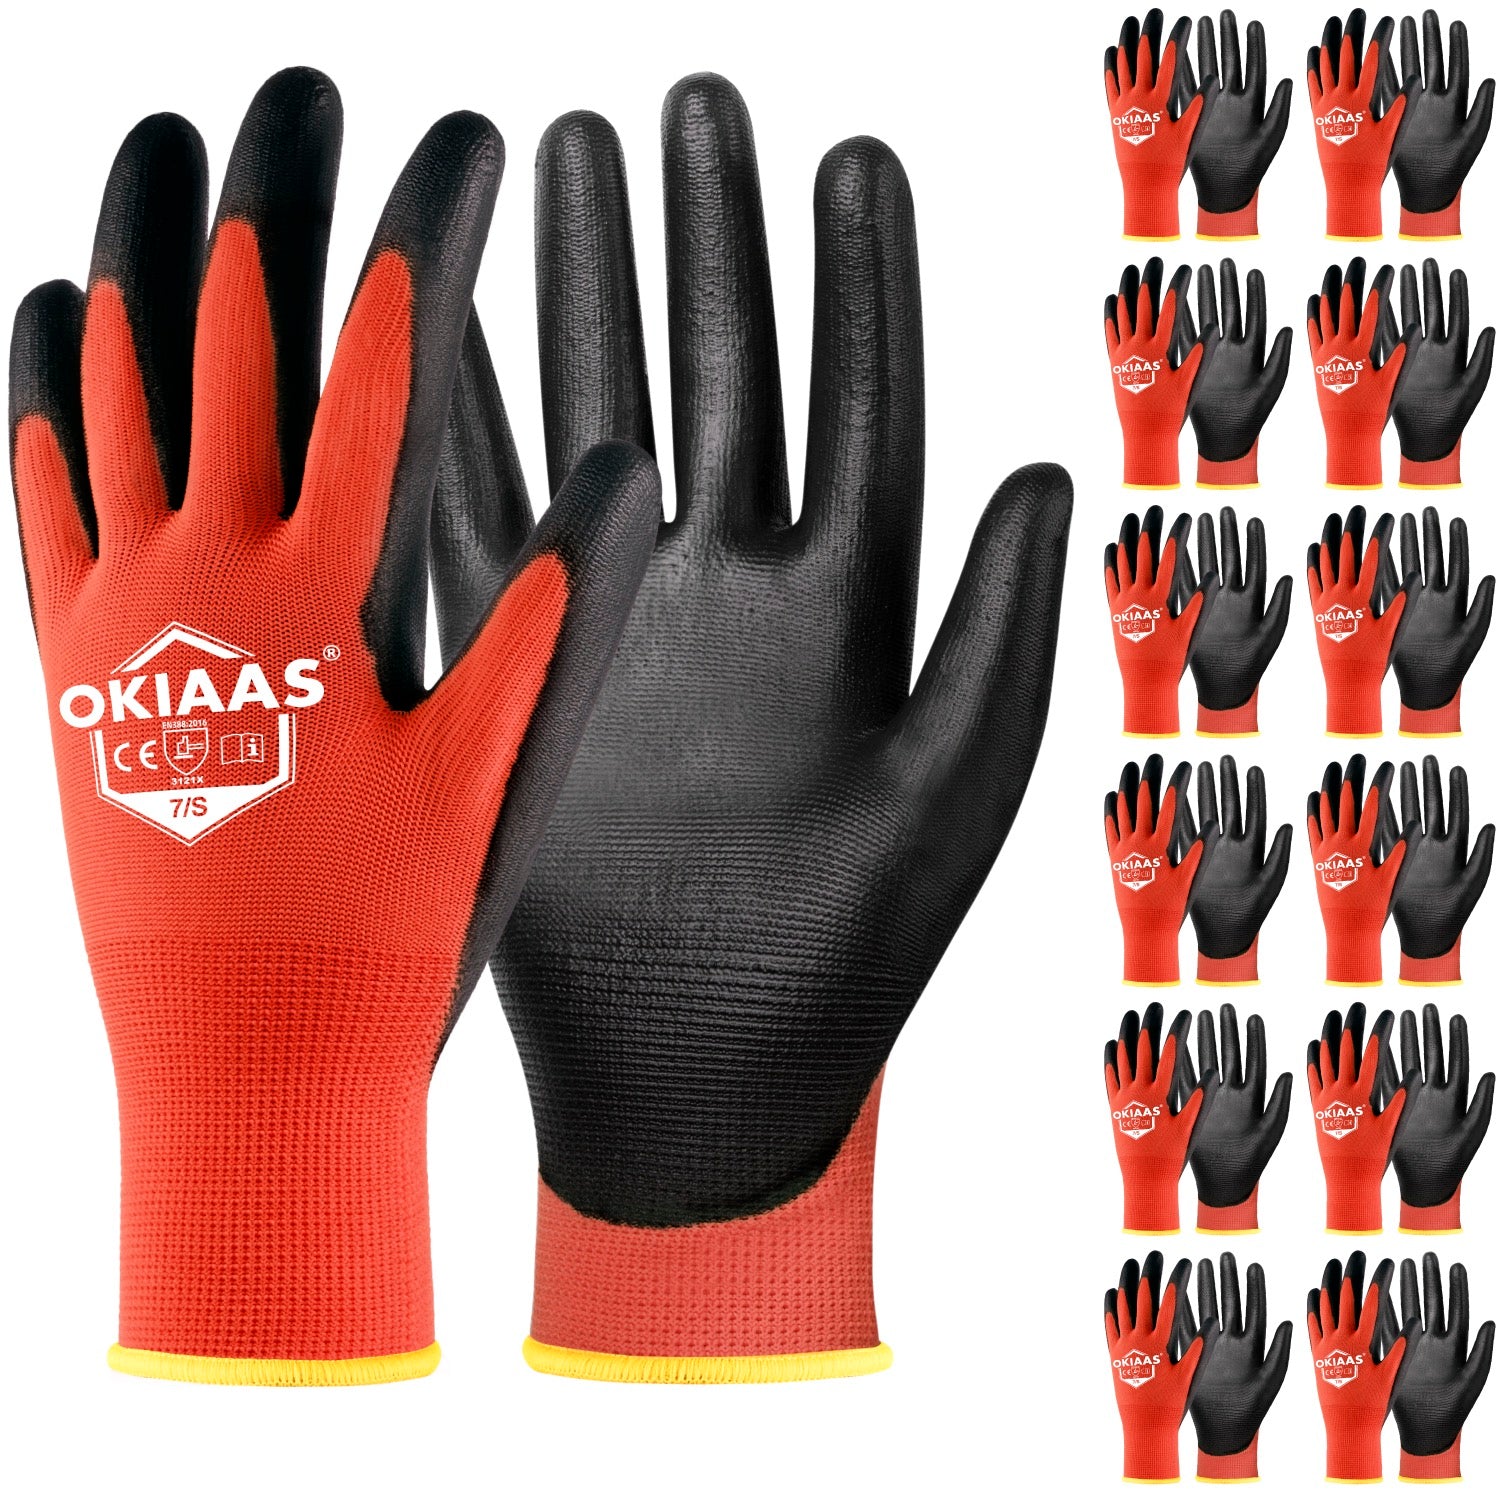 12 Pairs Safety Work Gloves with PU Coated, for Mechanic, Warehouse, Gardening